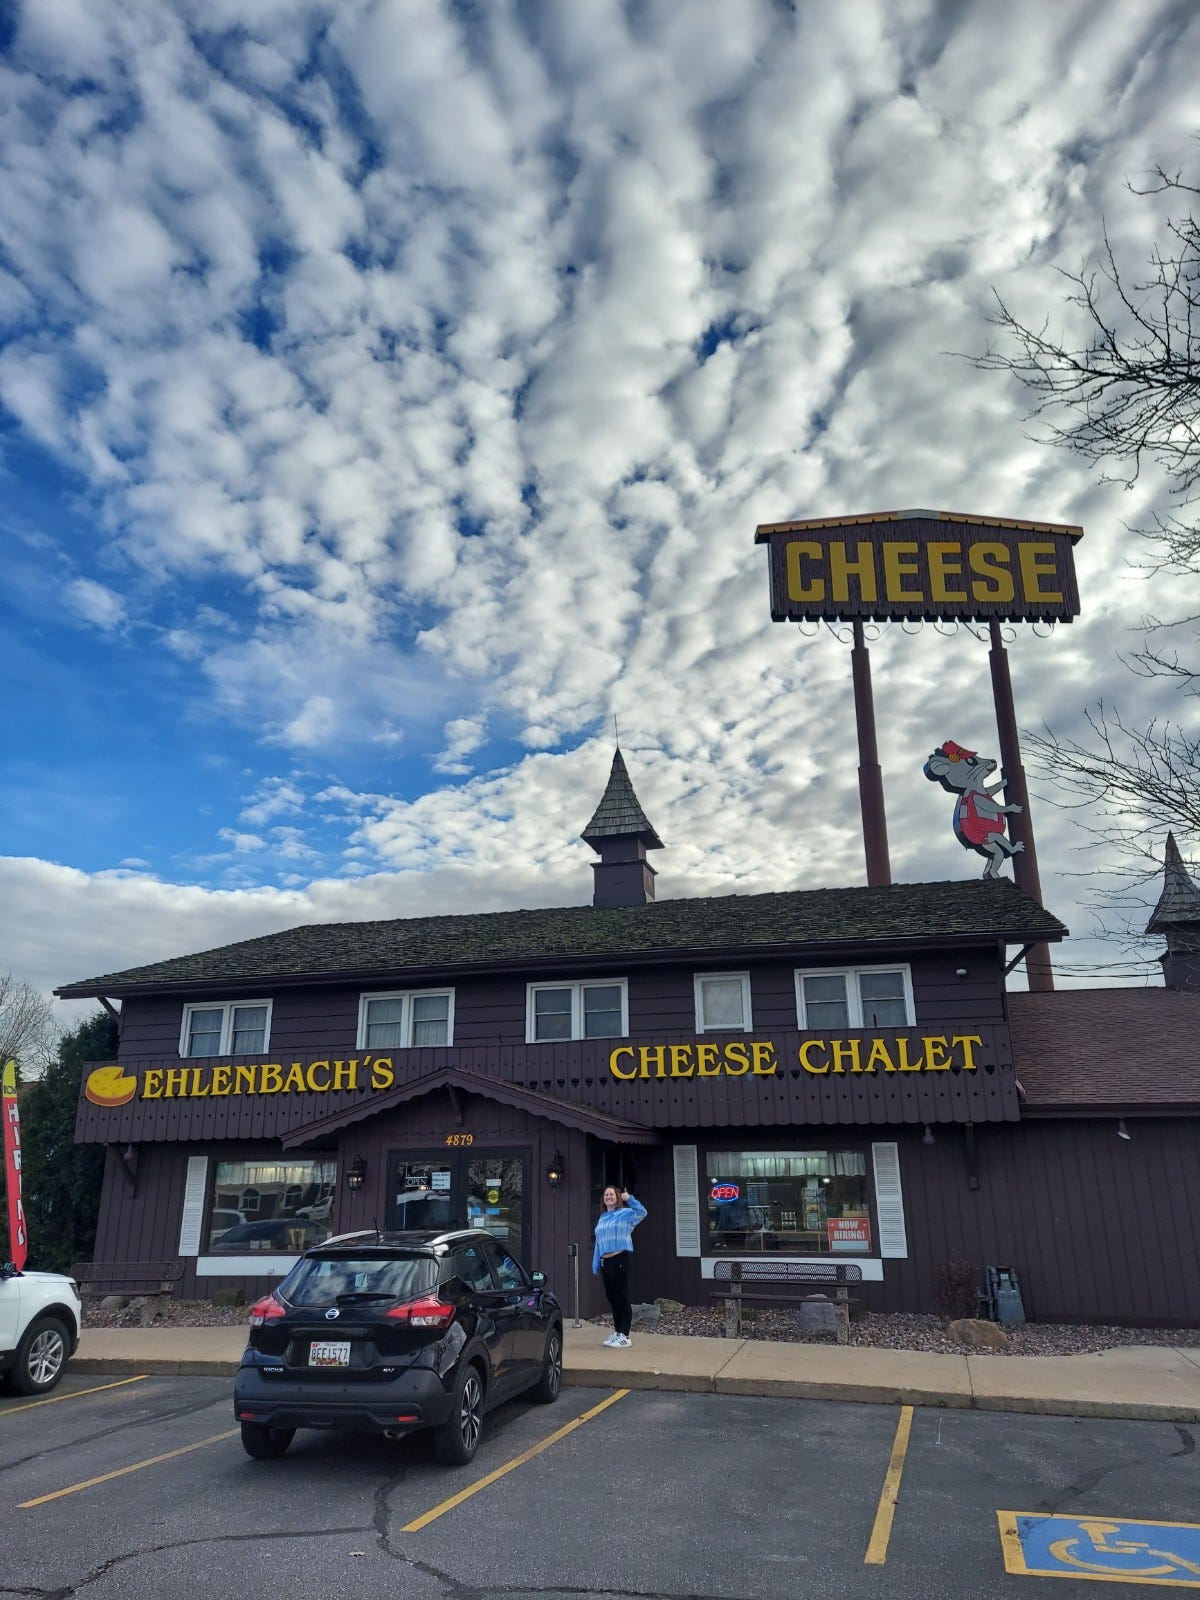 Windsor, WI - Mouse House Cheesehaus